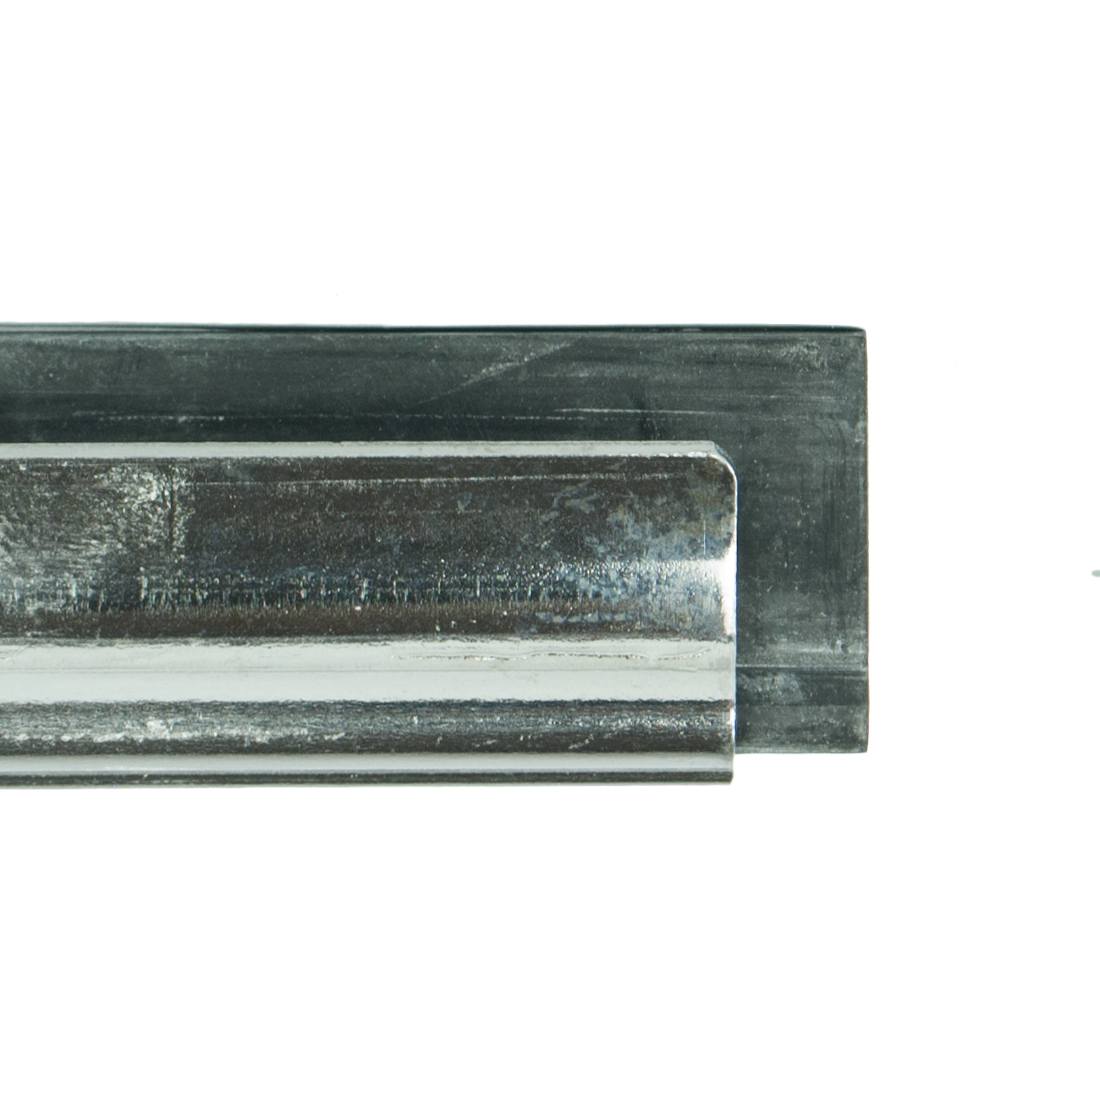 Pulex Stainless Steel Squeegee Rubber Close Up View